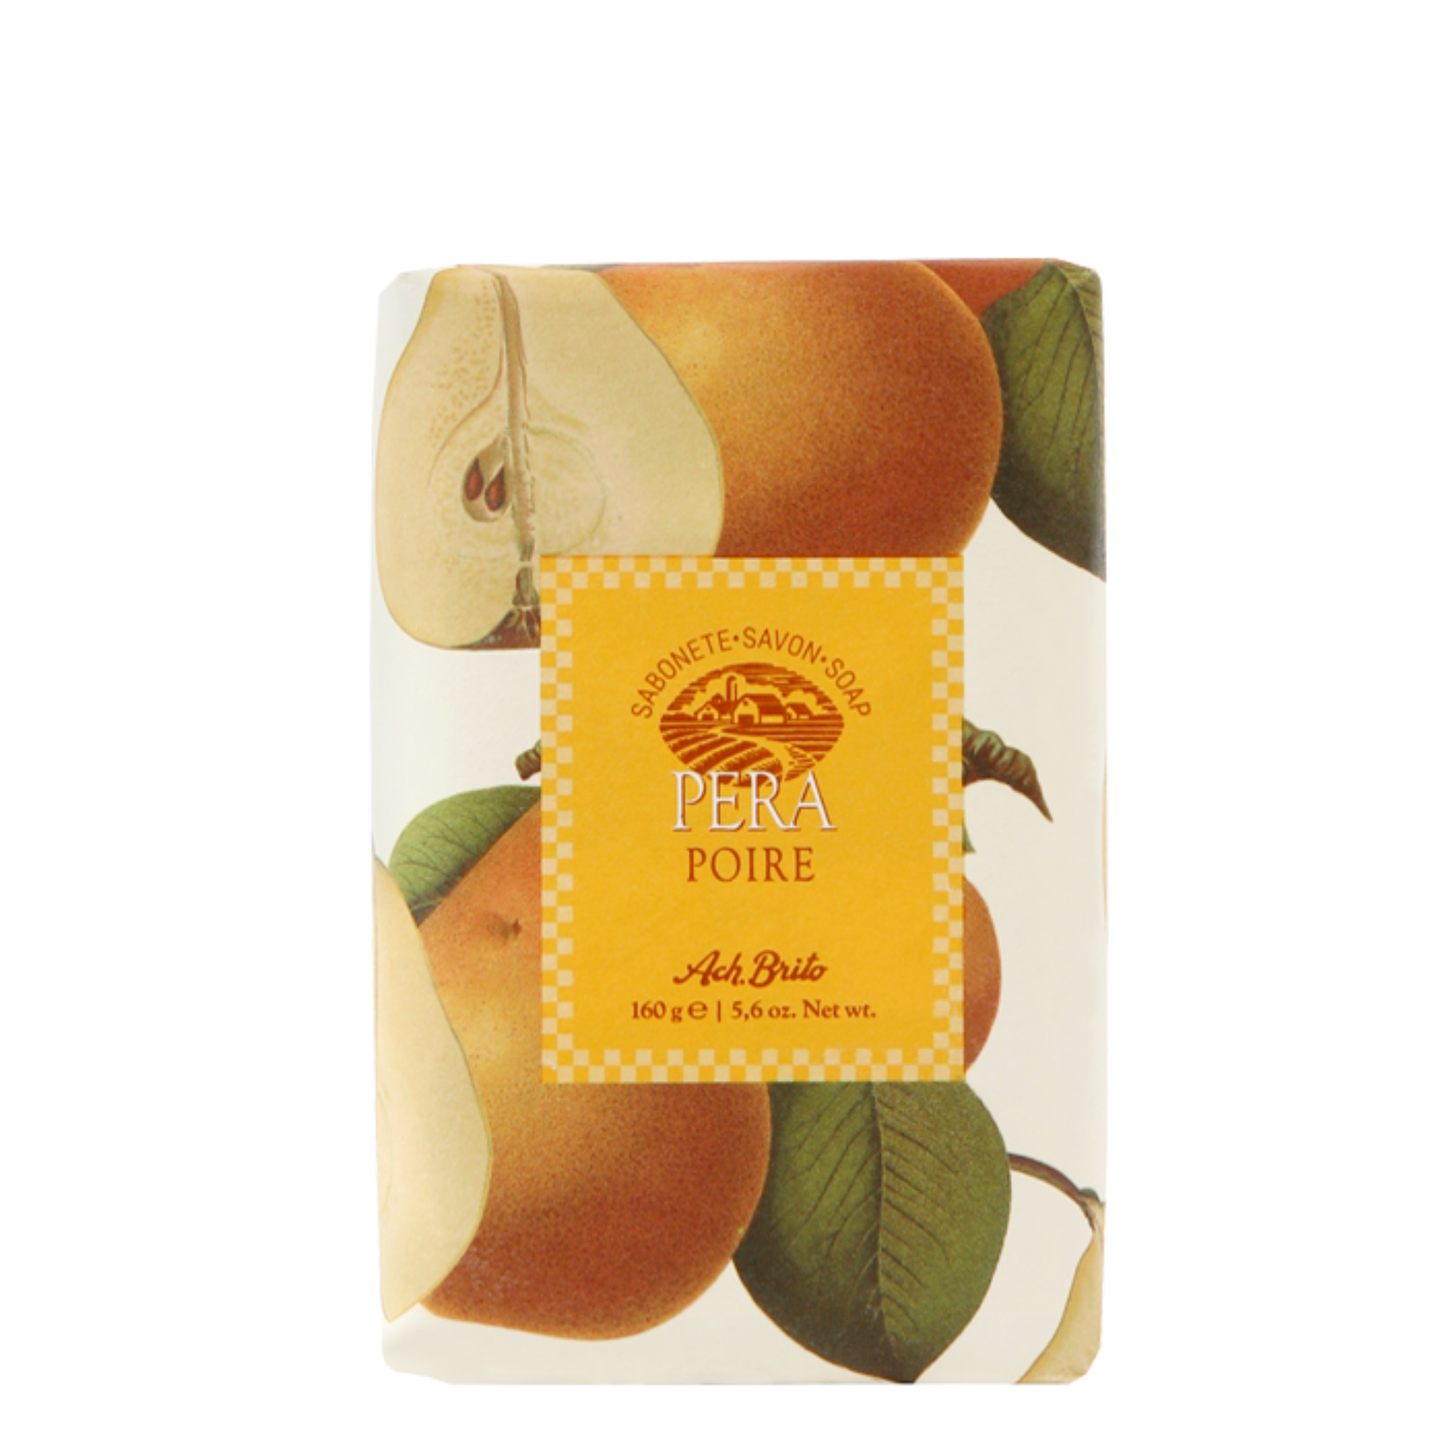 Primary Image of Pear (Pera) Bar Soap